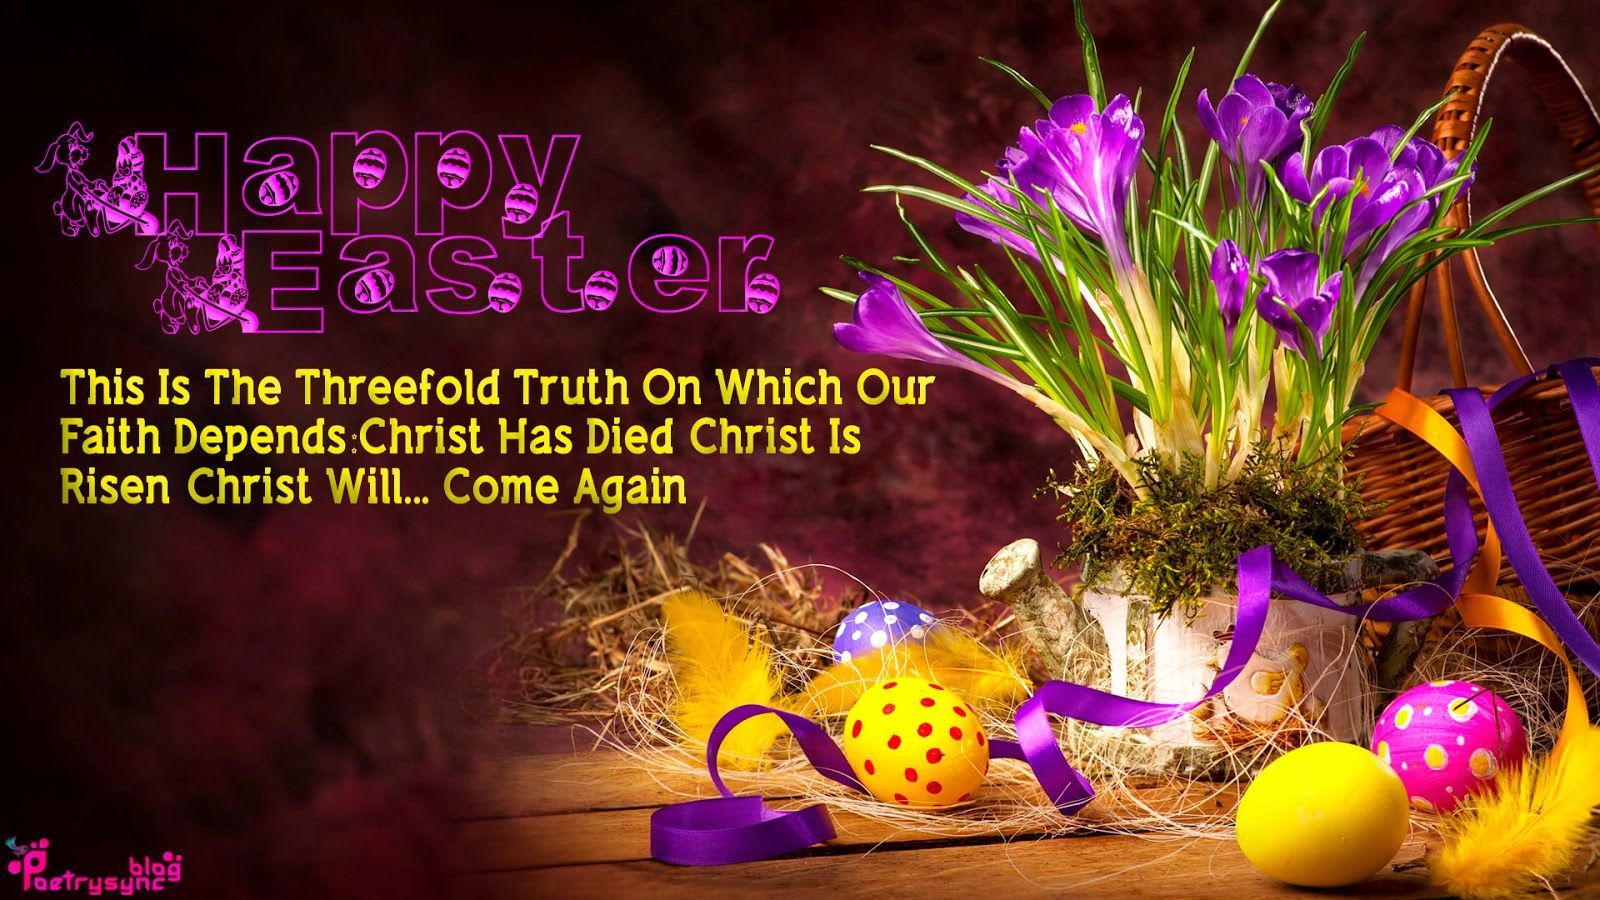 Easter Holiday Wishes Wallpaper and Quotes Picture. Happy